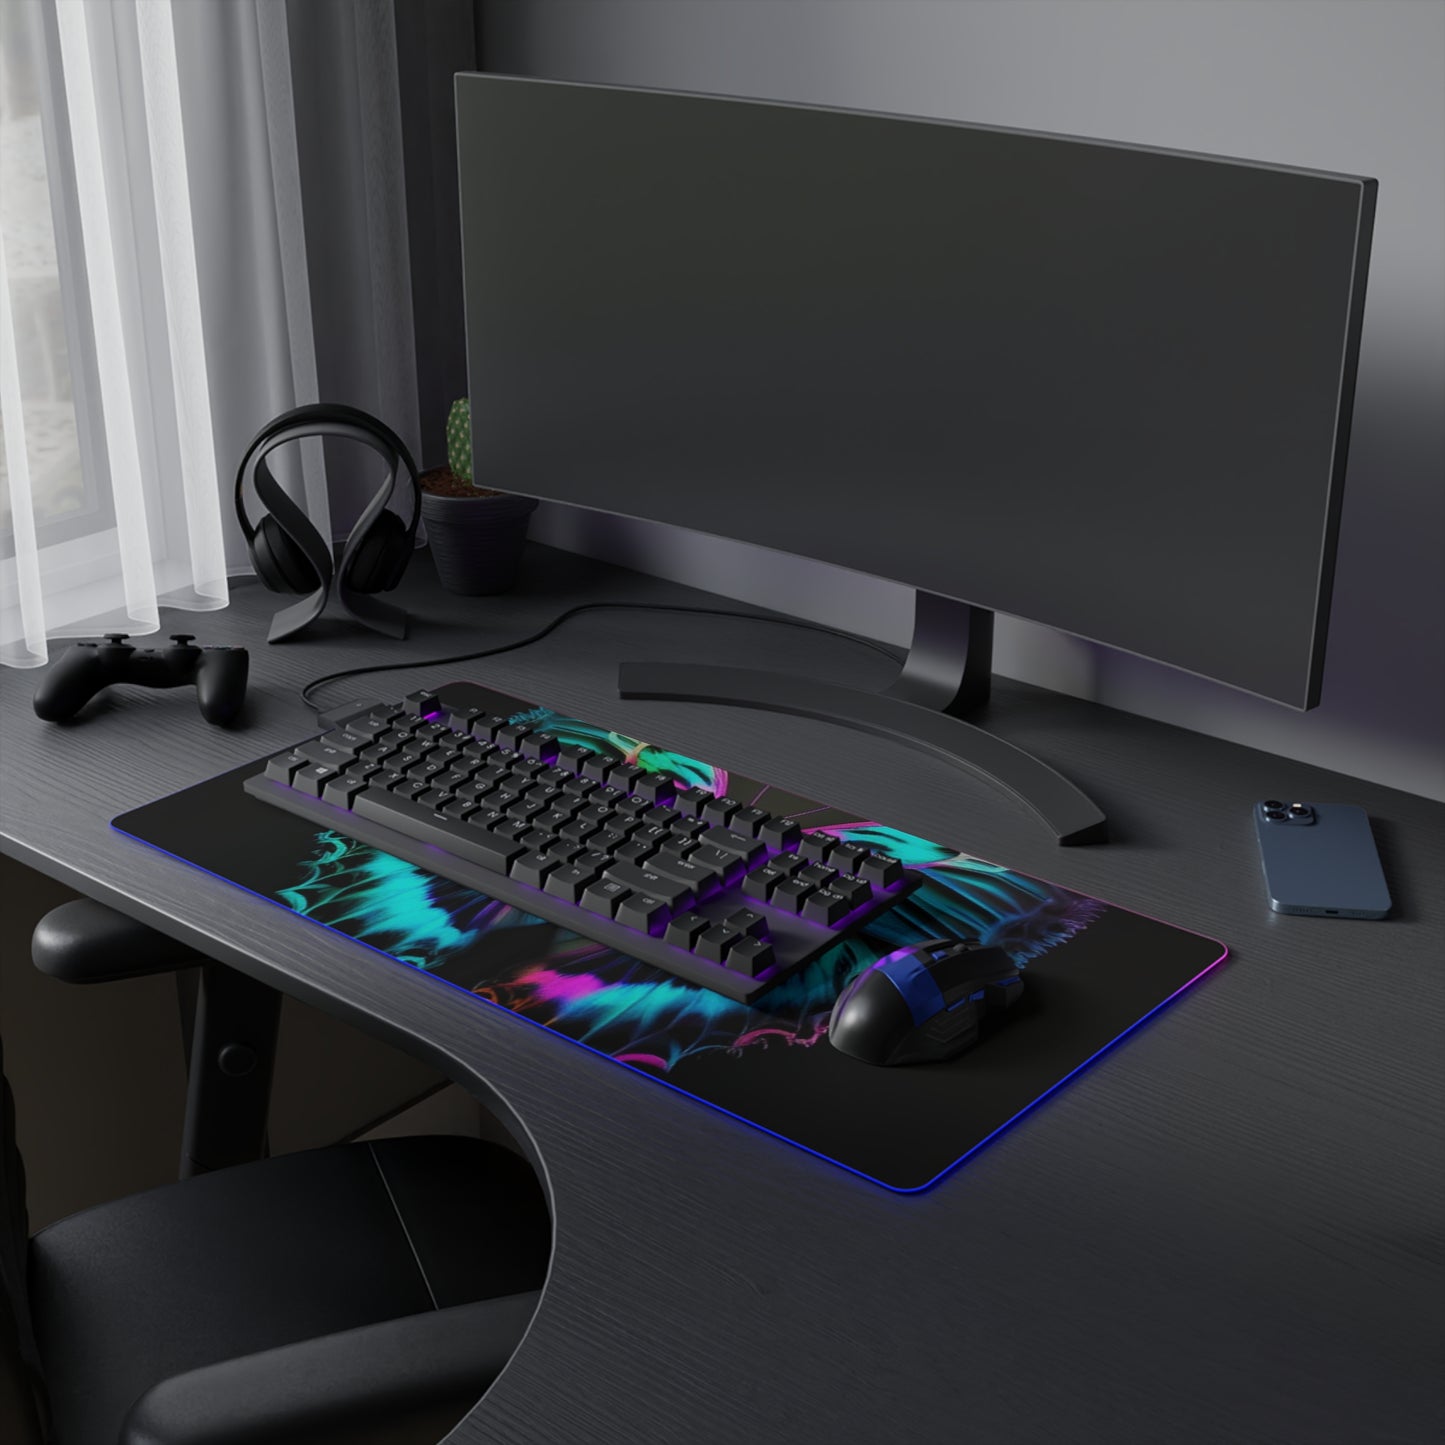 LED Gaming Mouse Pad Neon Butterfly Fusion 4